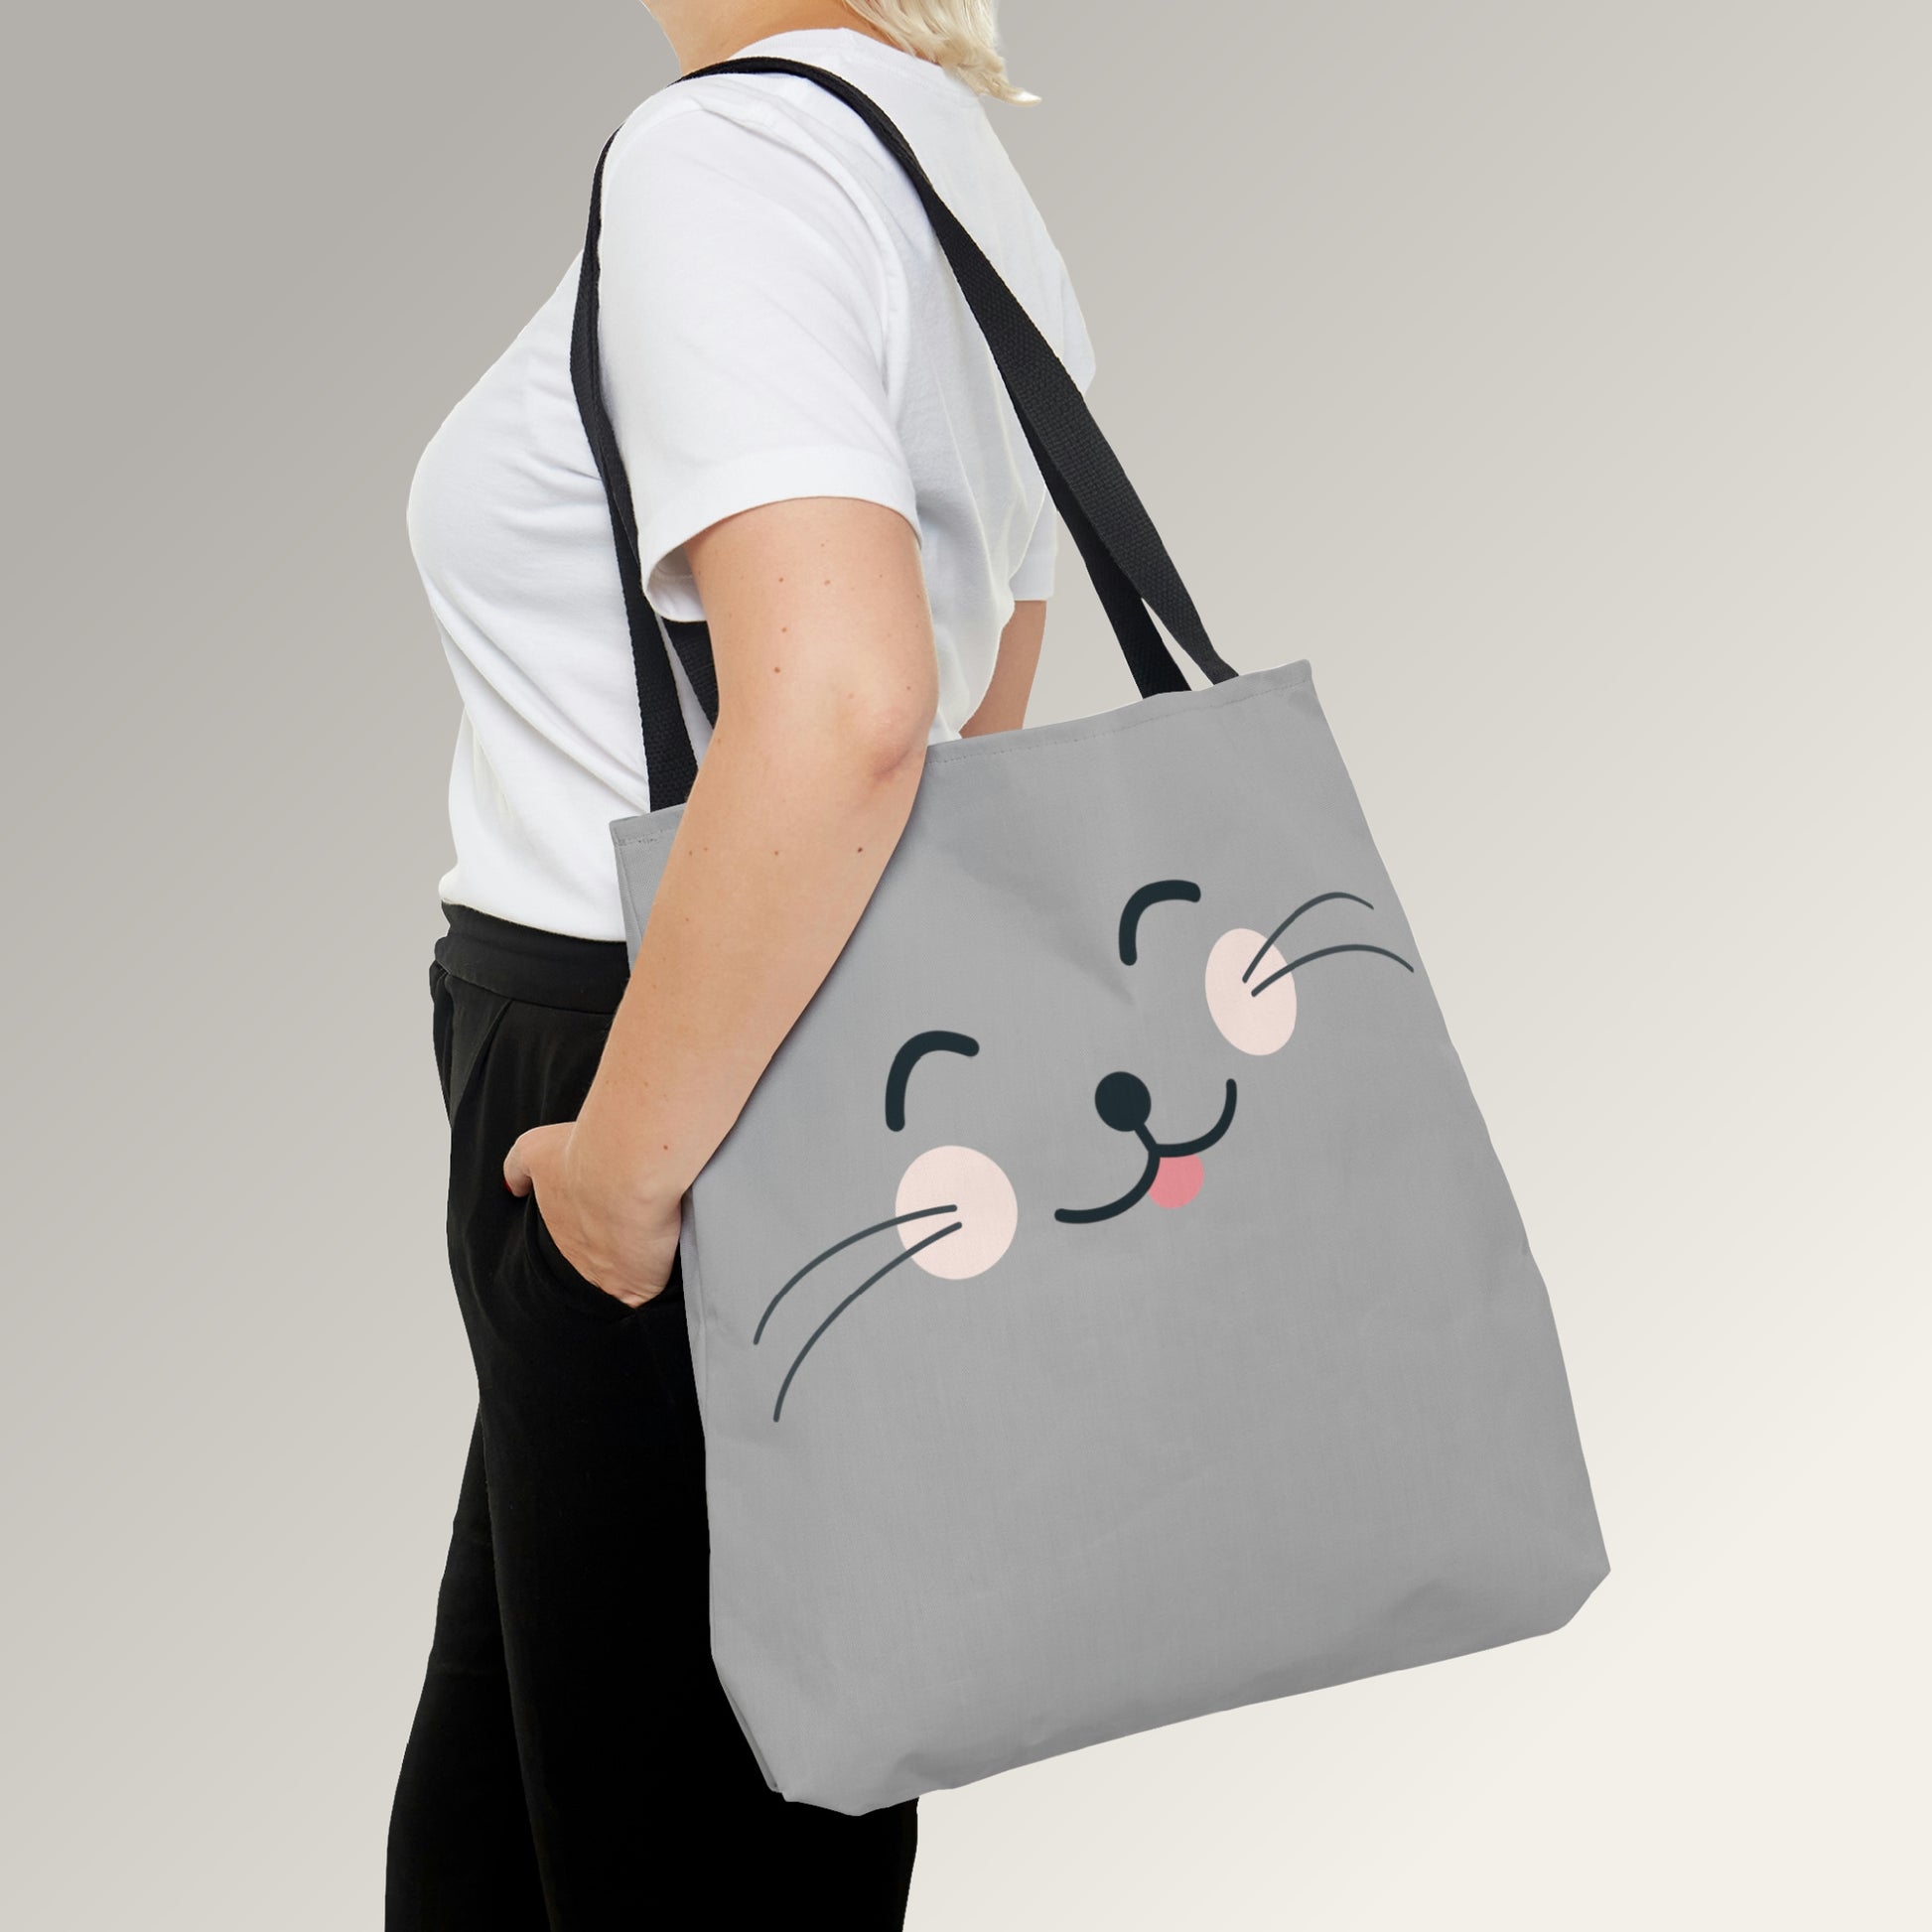 Mock up of woman carrying the large tote bag over her shoulder